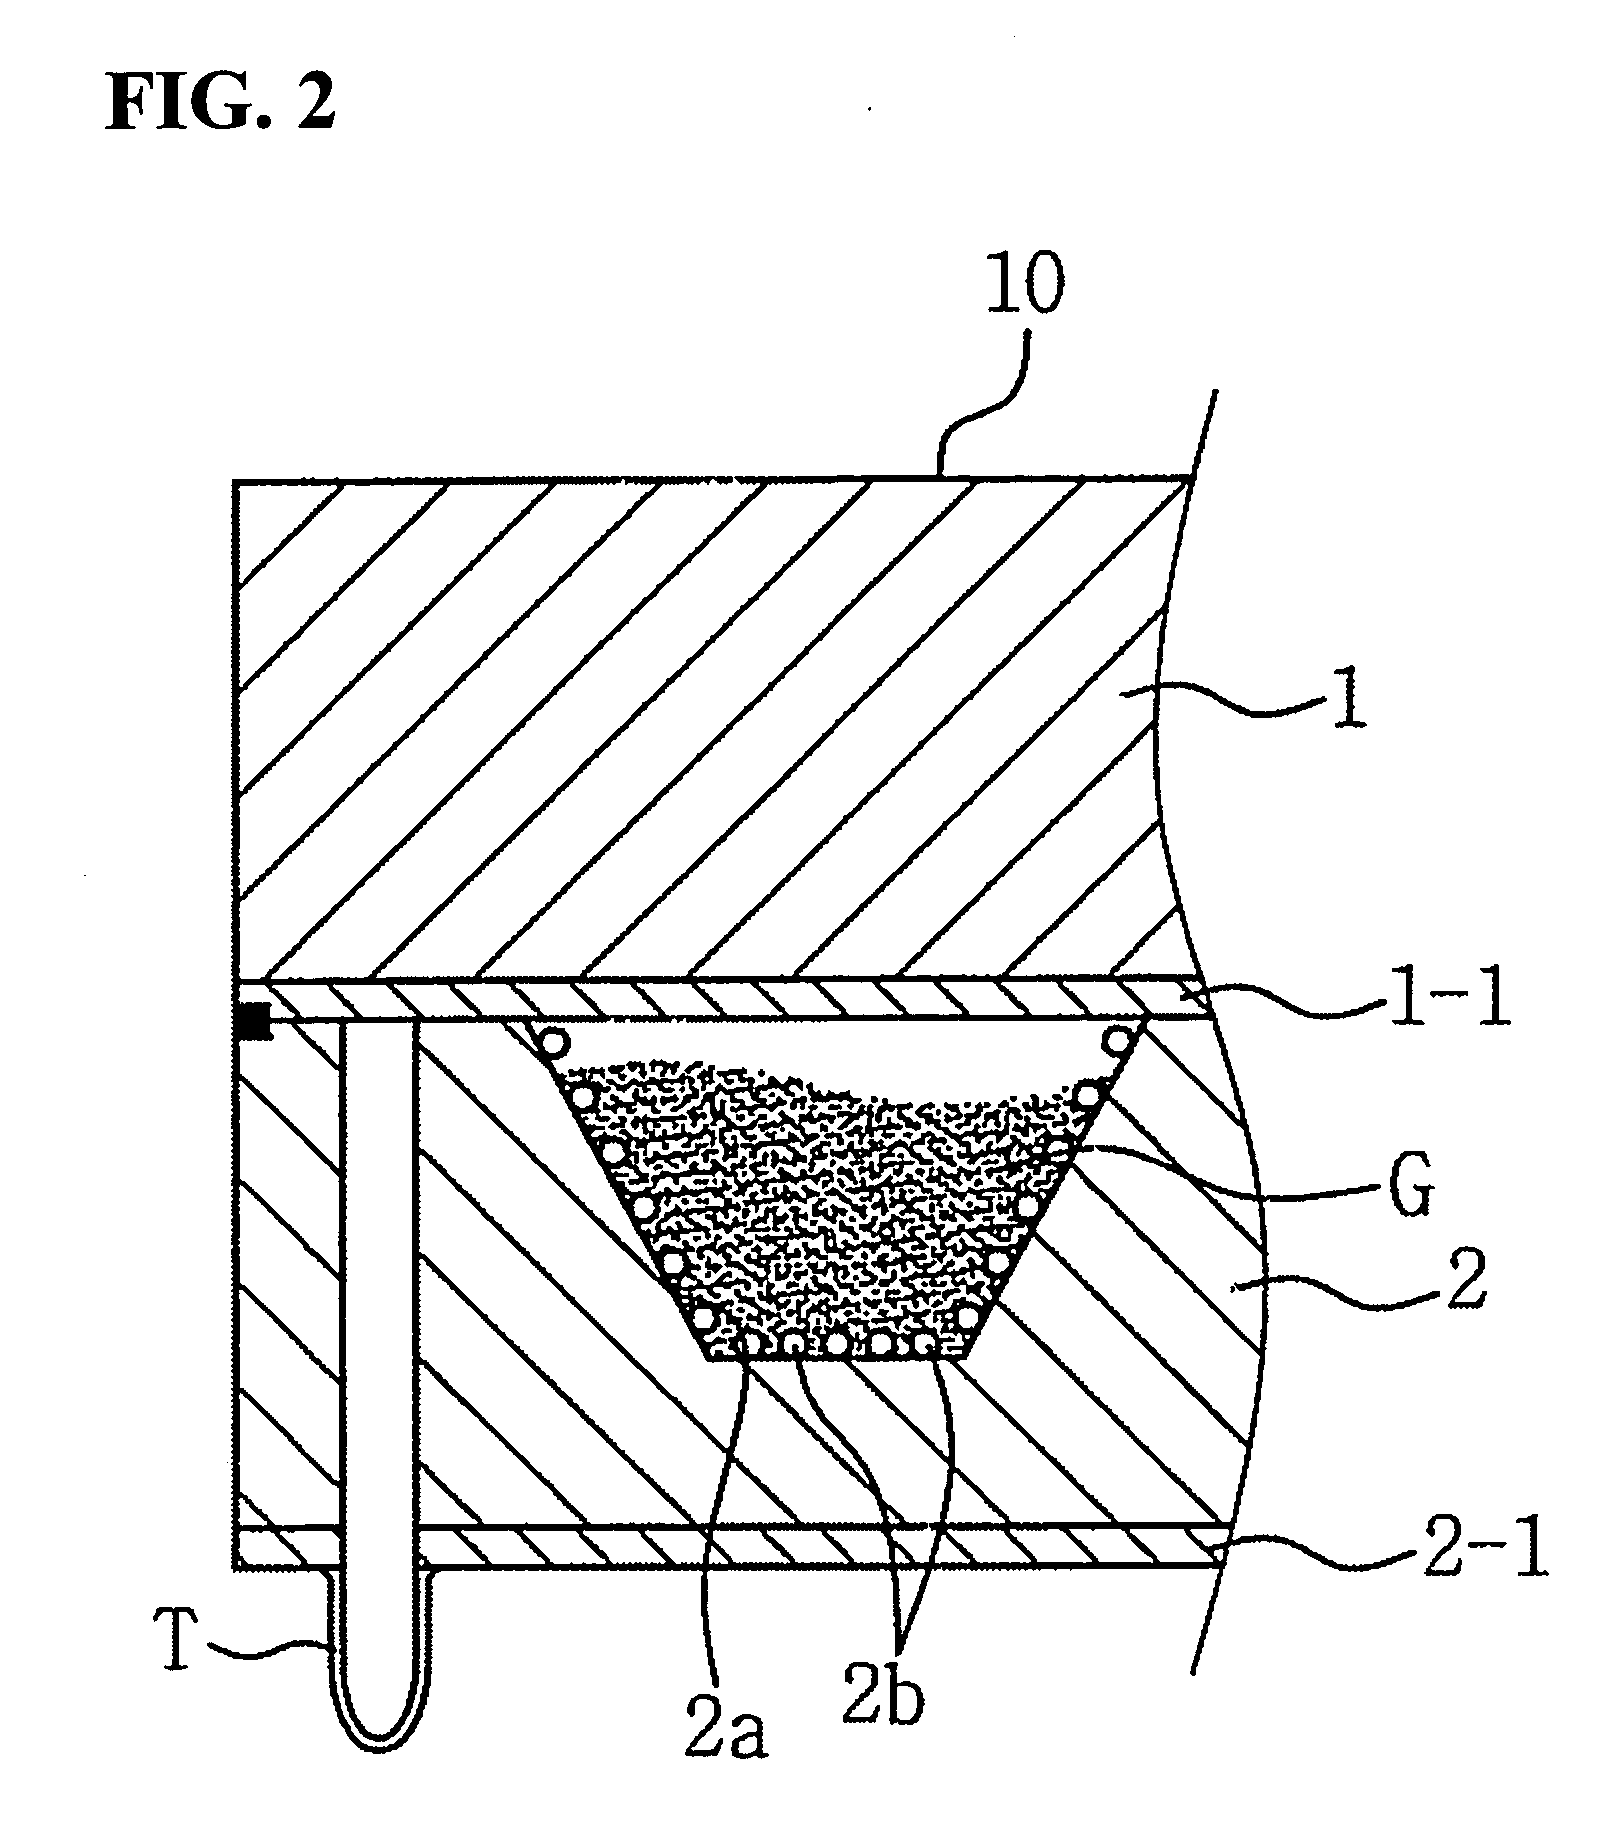 Plasma display panel without injection tip, and method of manufacturing the same